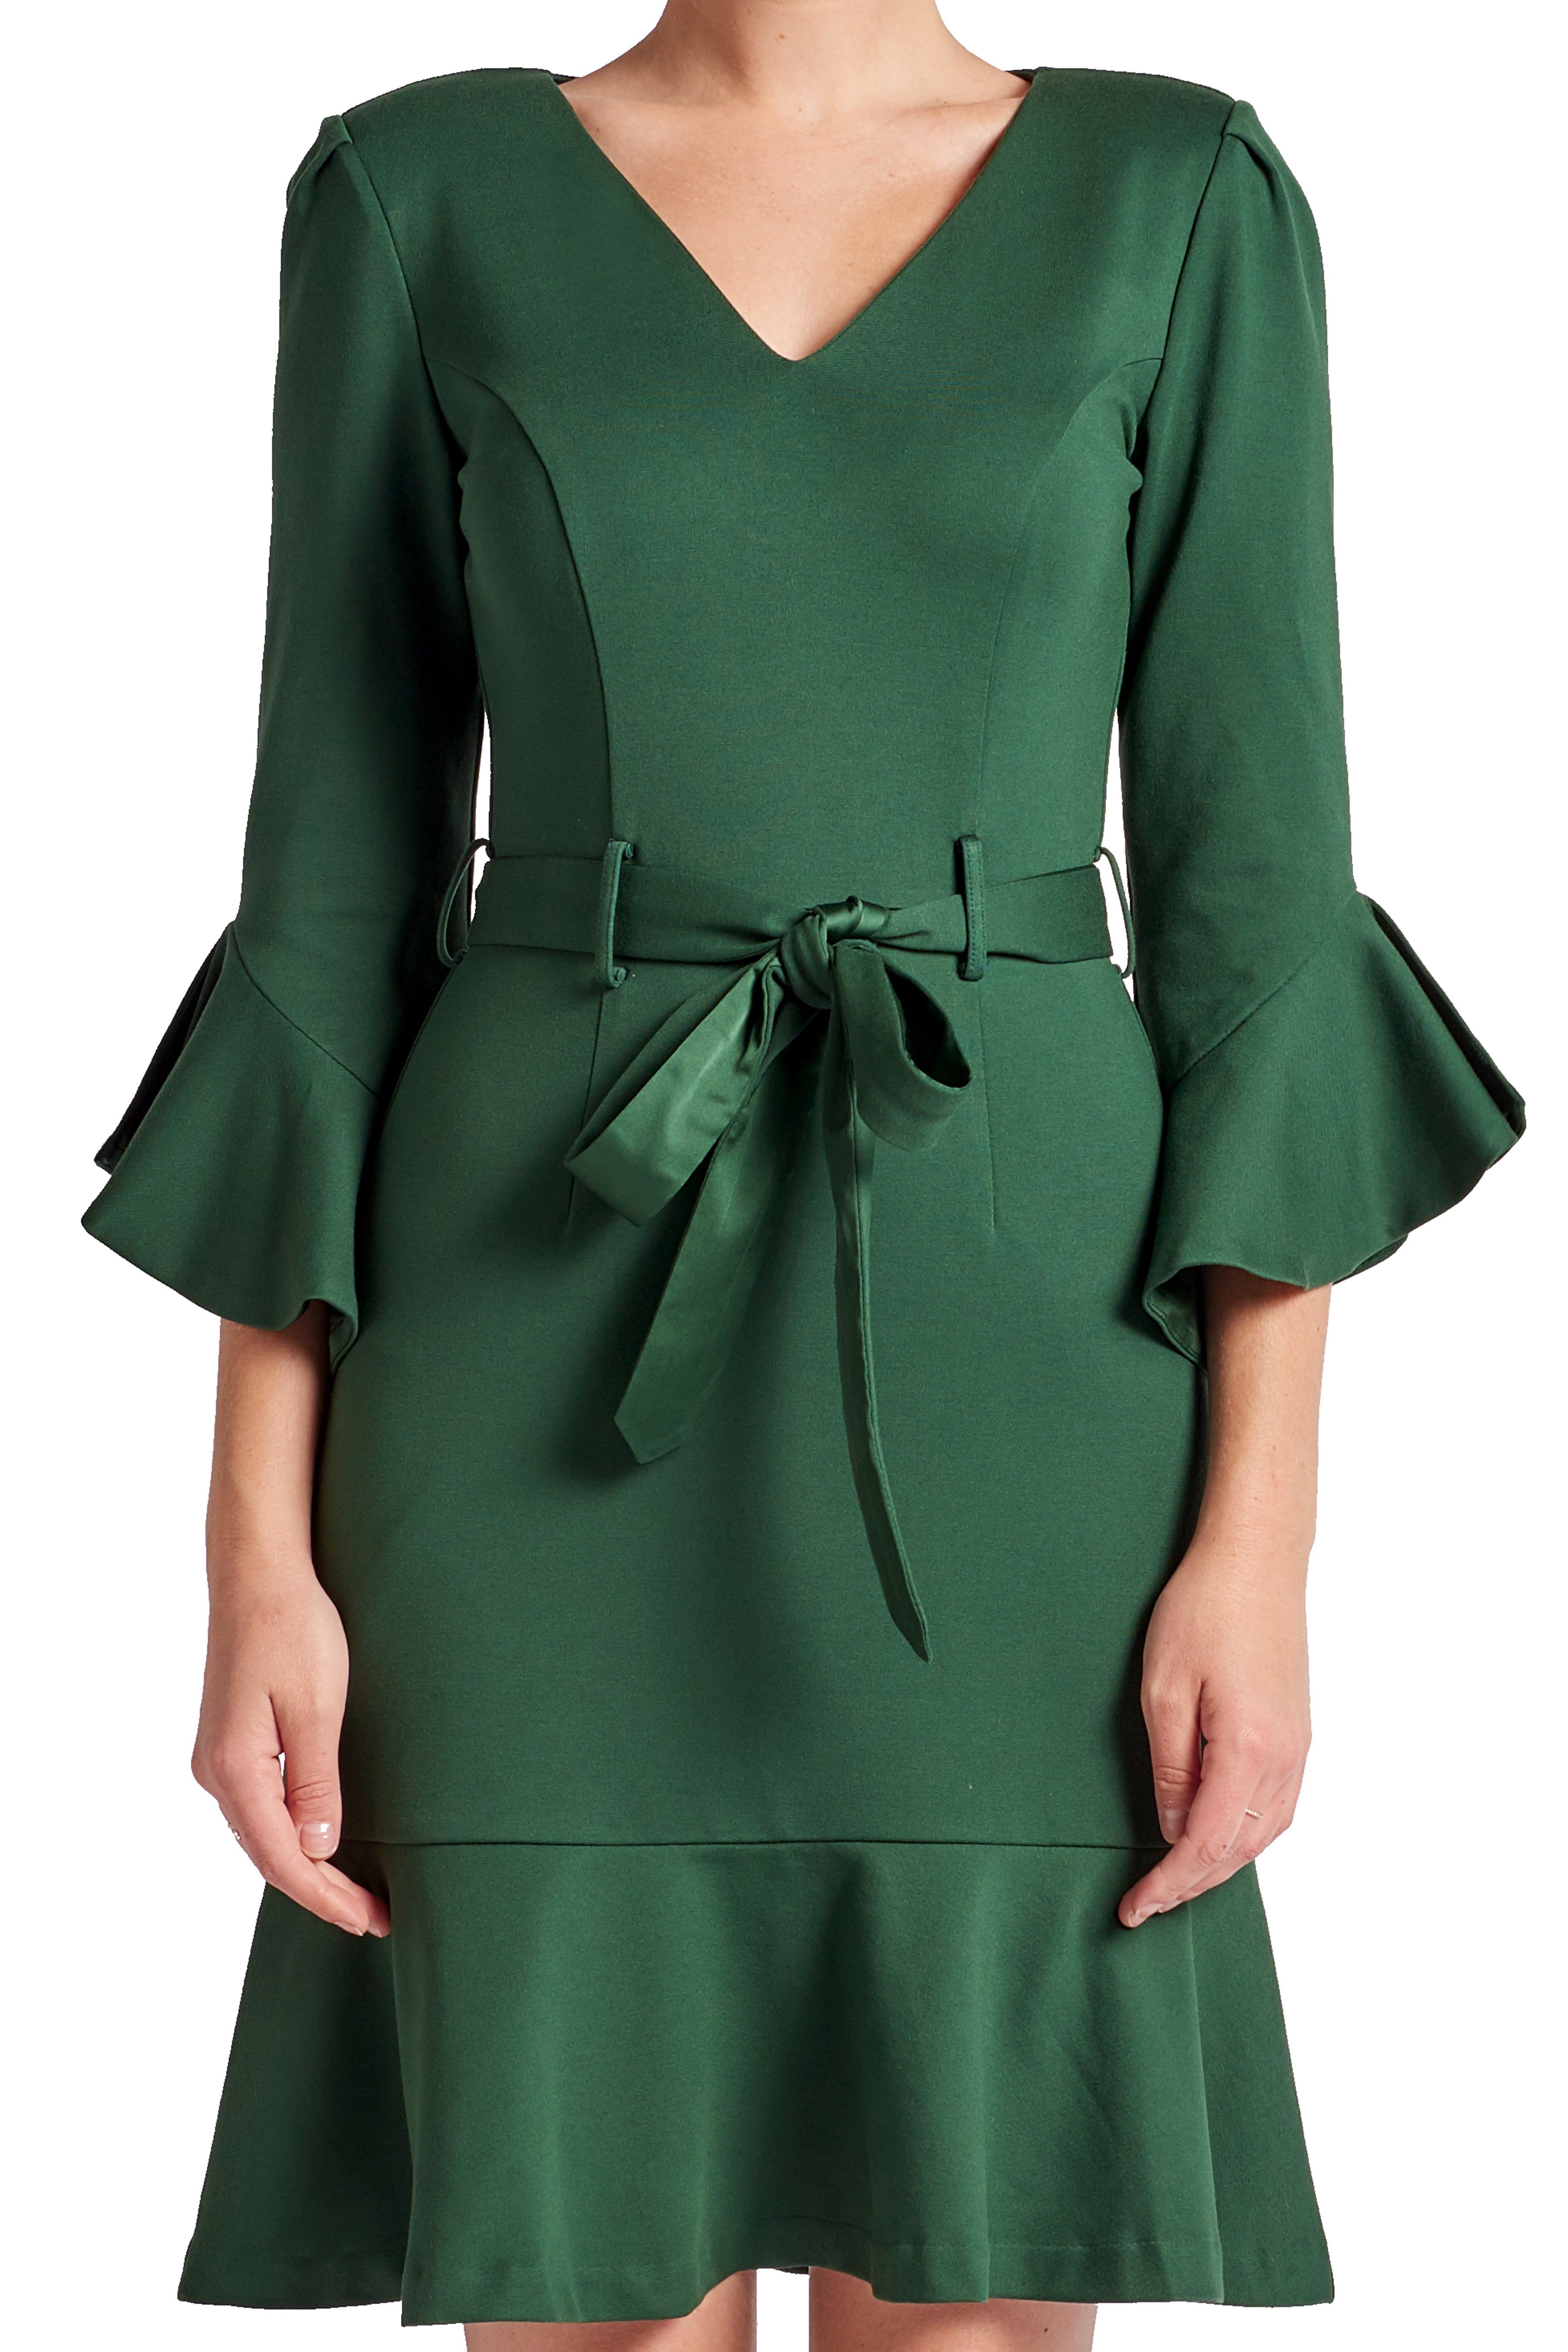 Close-up front view of model wearing the Simona Maghen Tayte Dress in forest green, knee length, v-neck knit Ponte dress with 3/4 bell sleeves, ruffle hem and self belt.